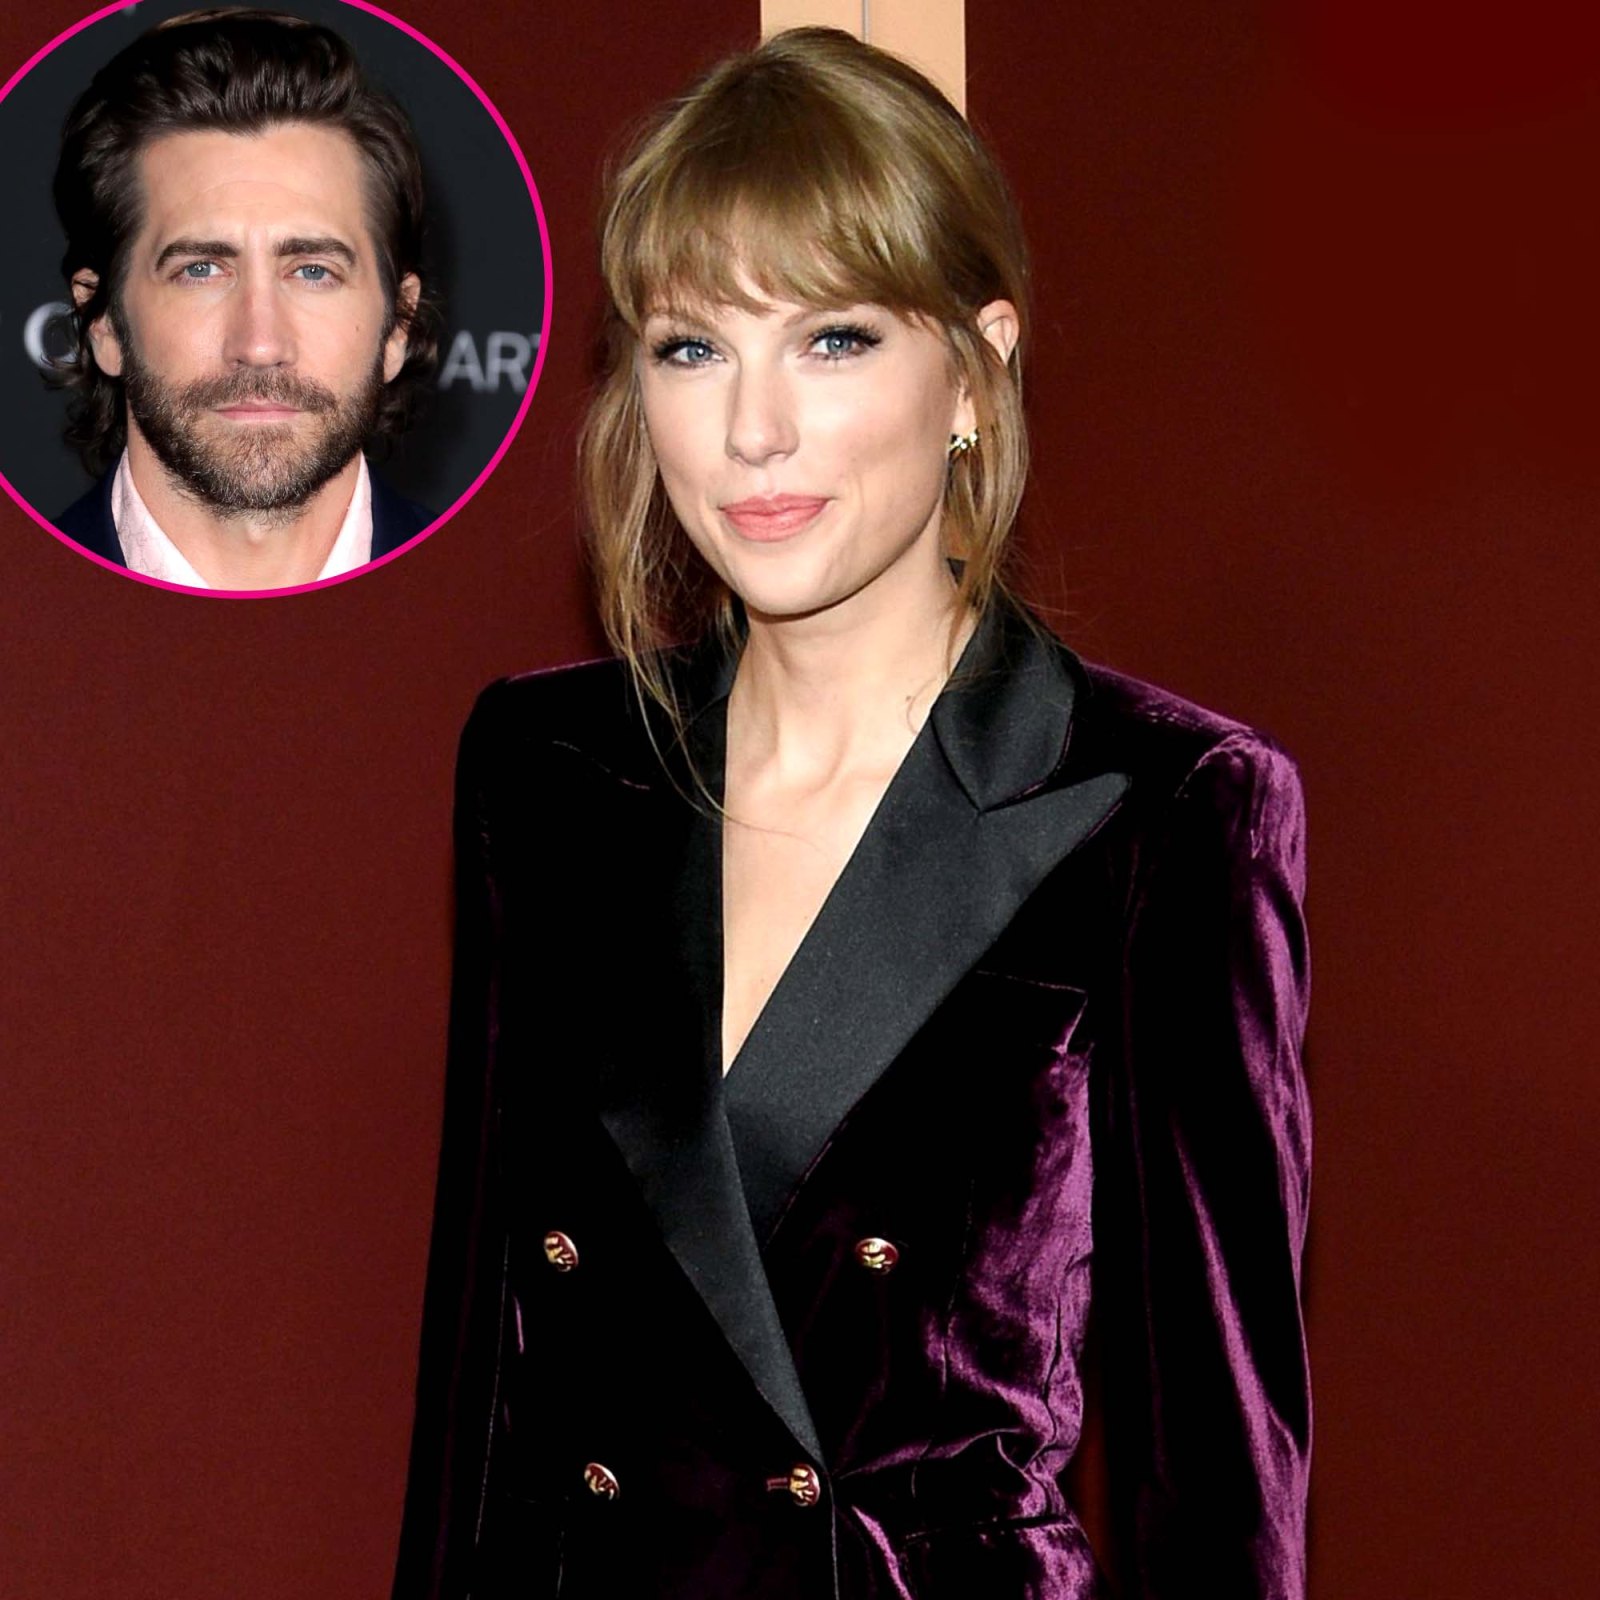 Taylor Swifts All Too Well Short Film Jake Gyllenhaal Easter Eggs More